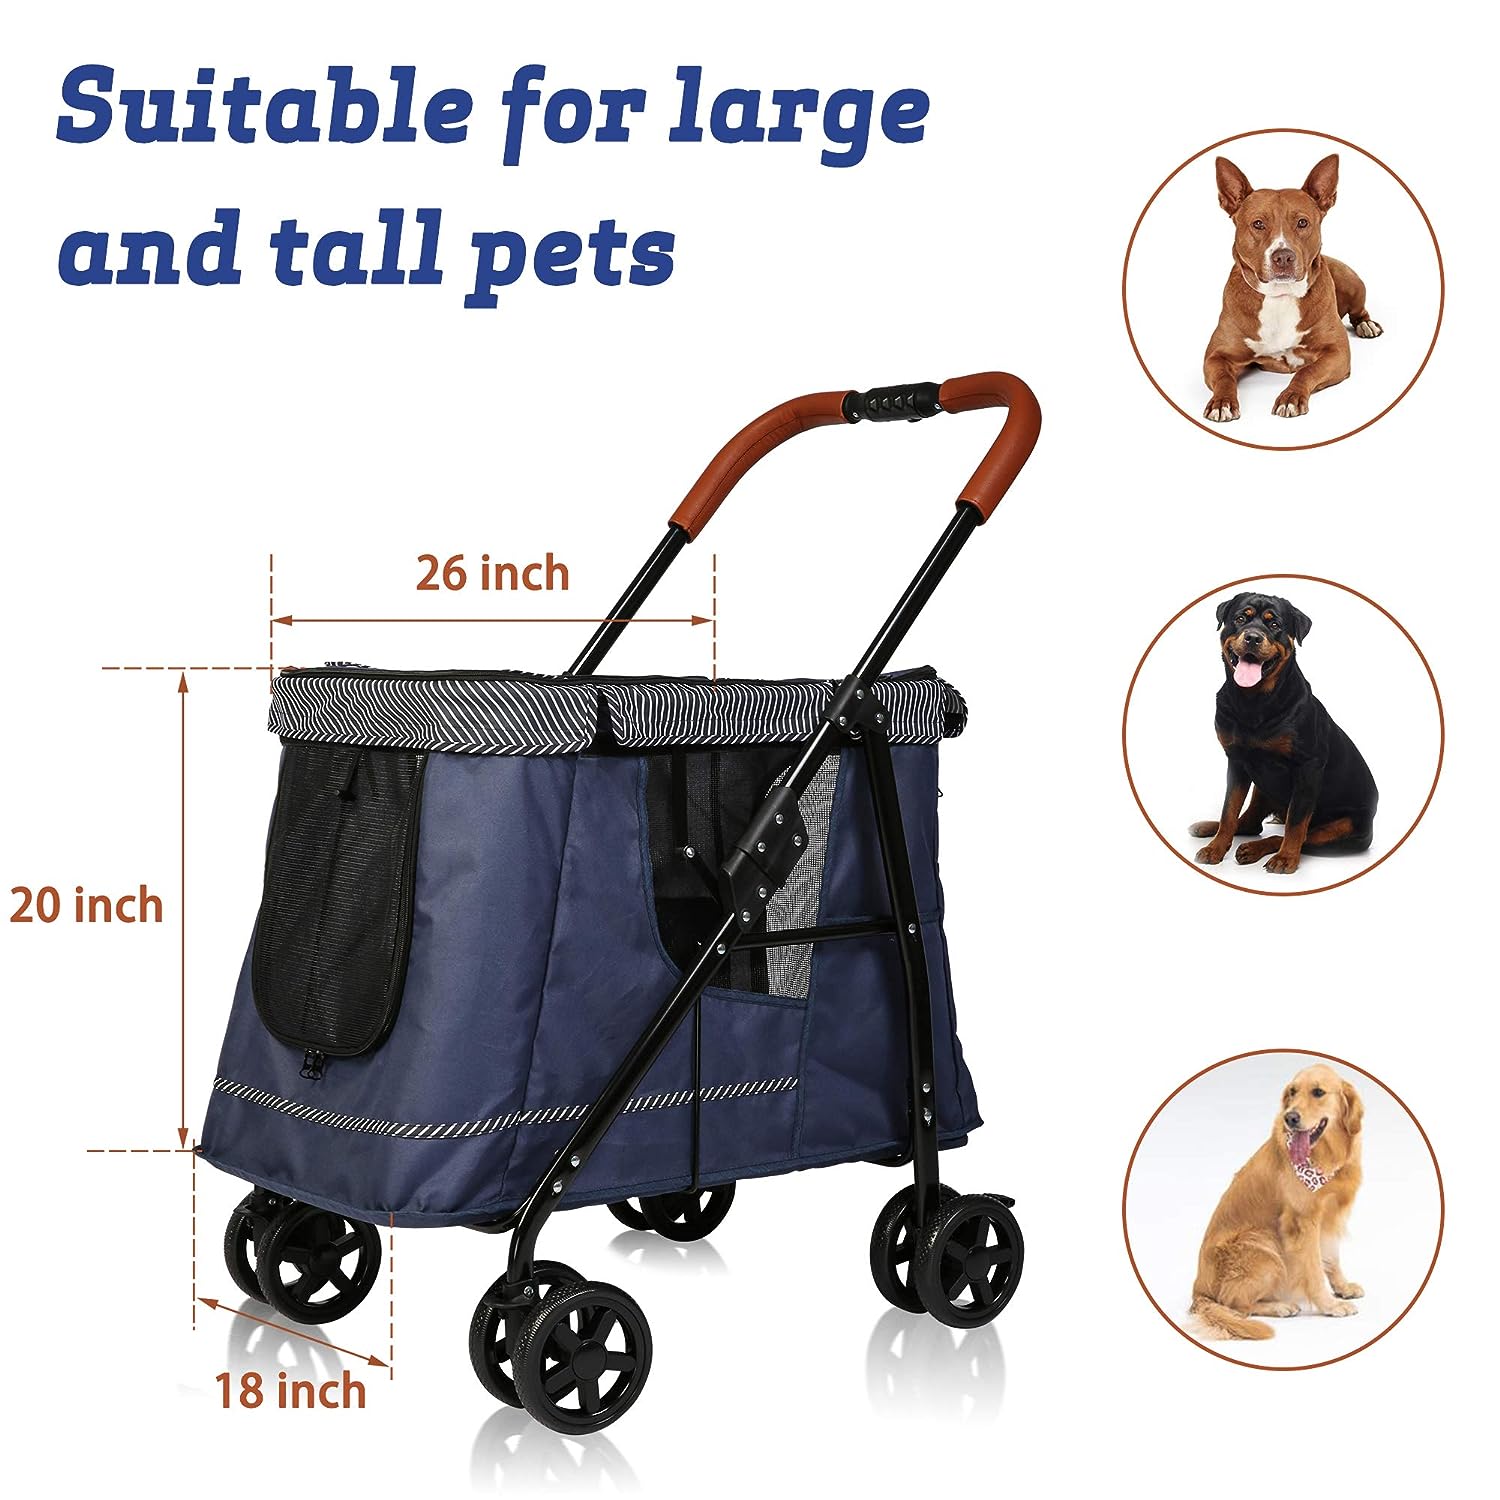 Folding Dog Stroller Pet Stroller with Removable Cushion and Multiple Mesh Windows, Blue